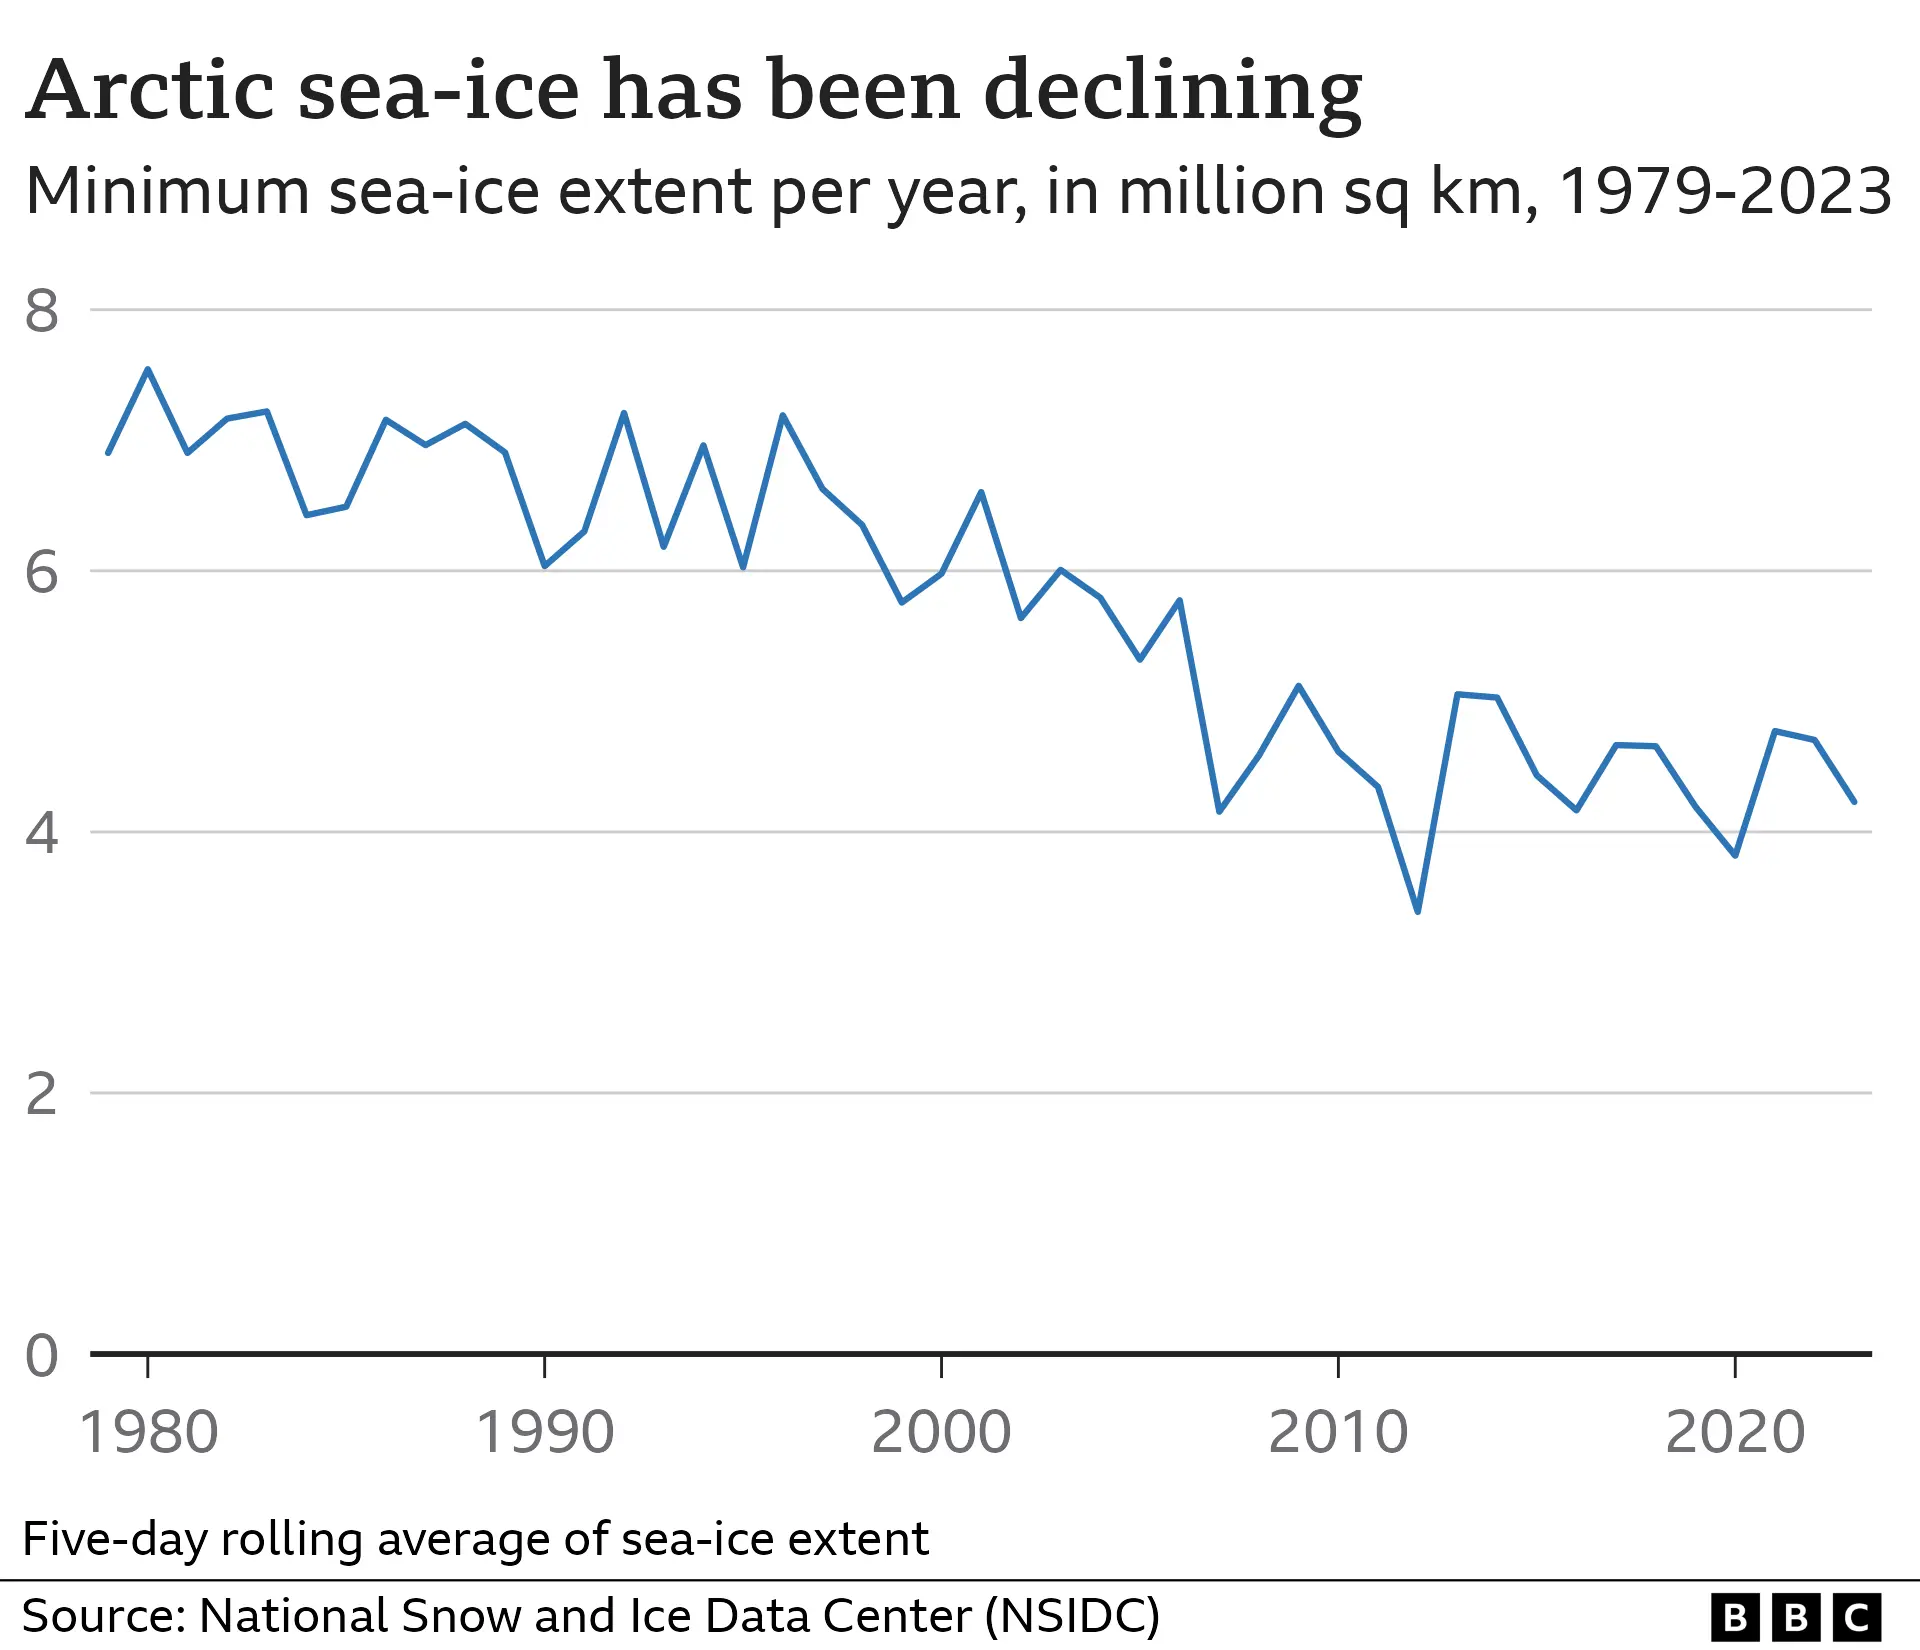 Line graph showing a fall in minimum Arctic sea-ice extent from 1979 to 2023